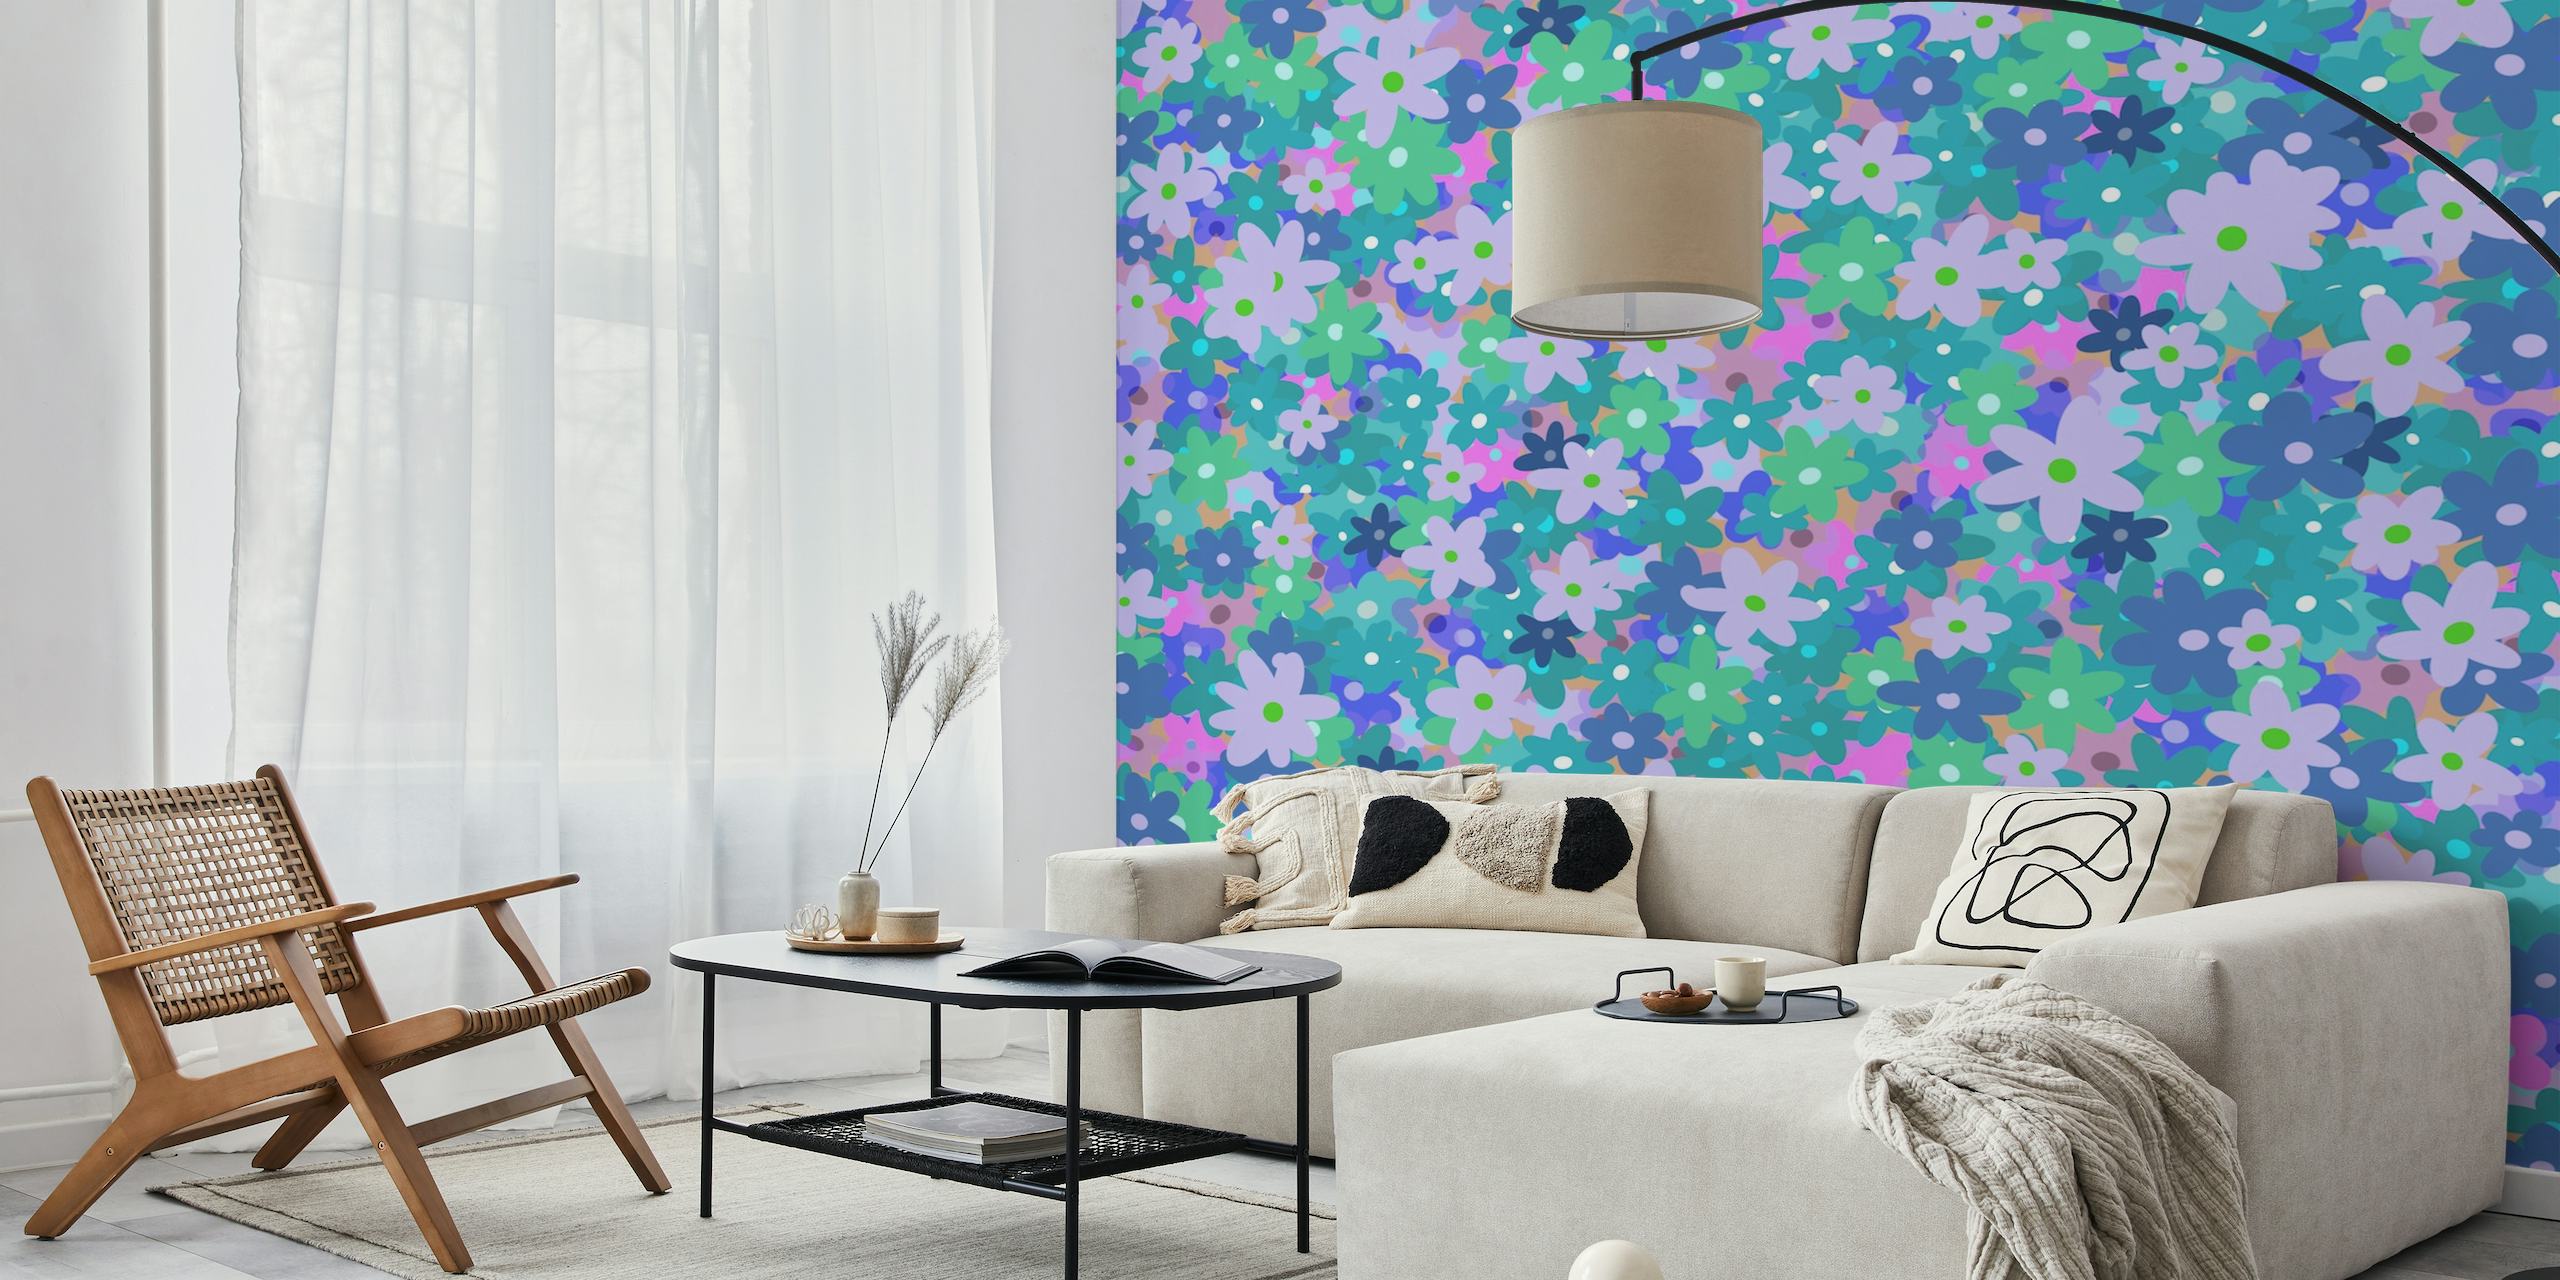 Purple and Blue Flowers Field wall mural with a mix of floral patterns for home decor.